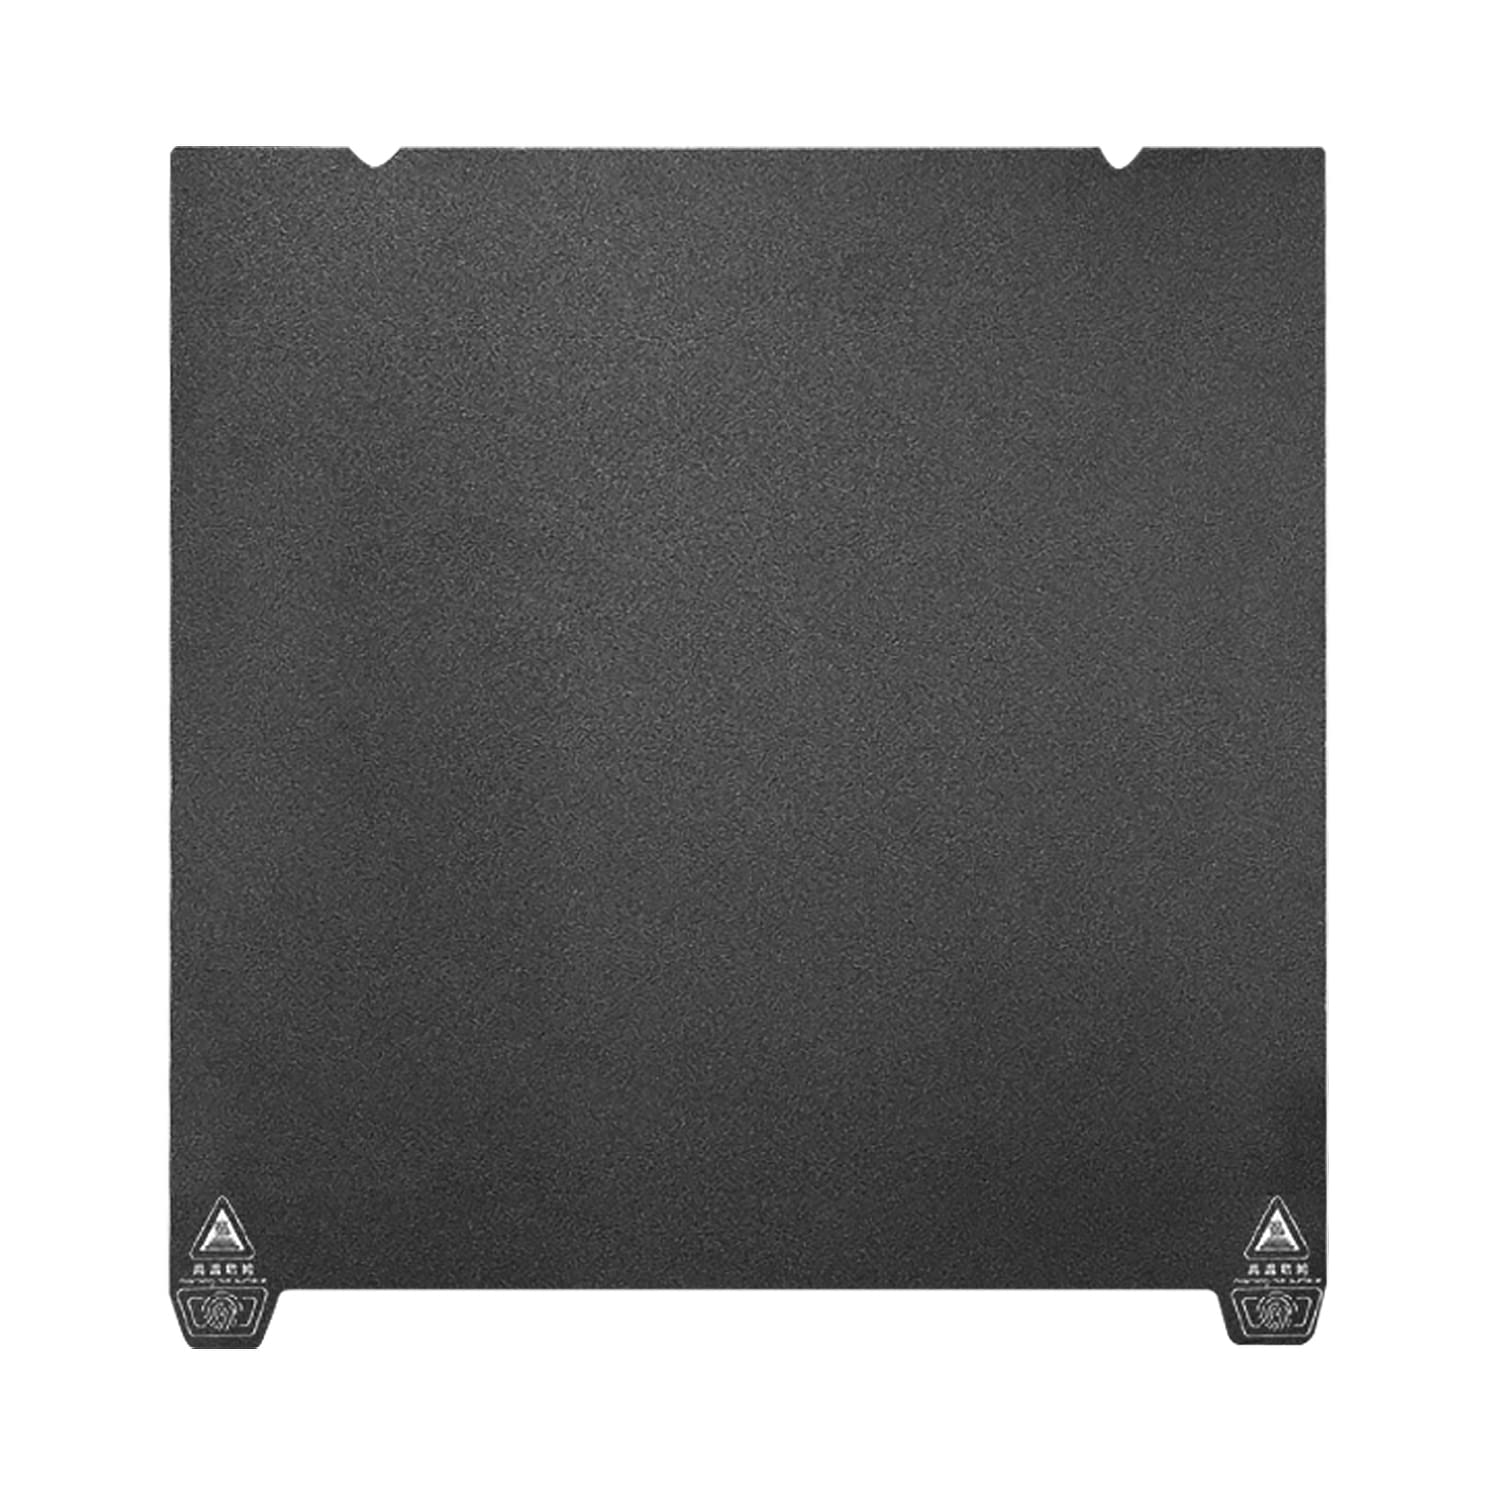 Ender 3 S1 Plus Frosted PC Build Plate Magnetic Flexible Bed 310x315mm for CR-10/10S Pro/MP Maker Pro Long LK1/ PRO LK5 PRO/Ender 3 Max 3D Printer